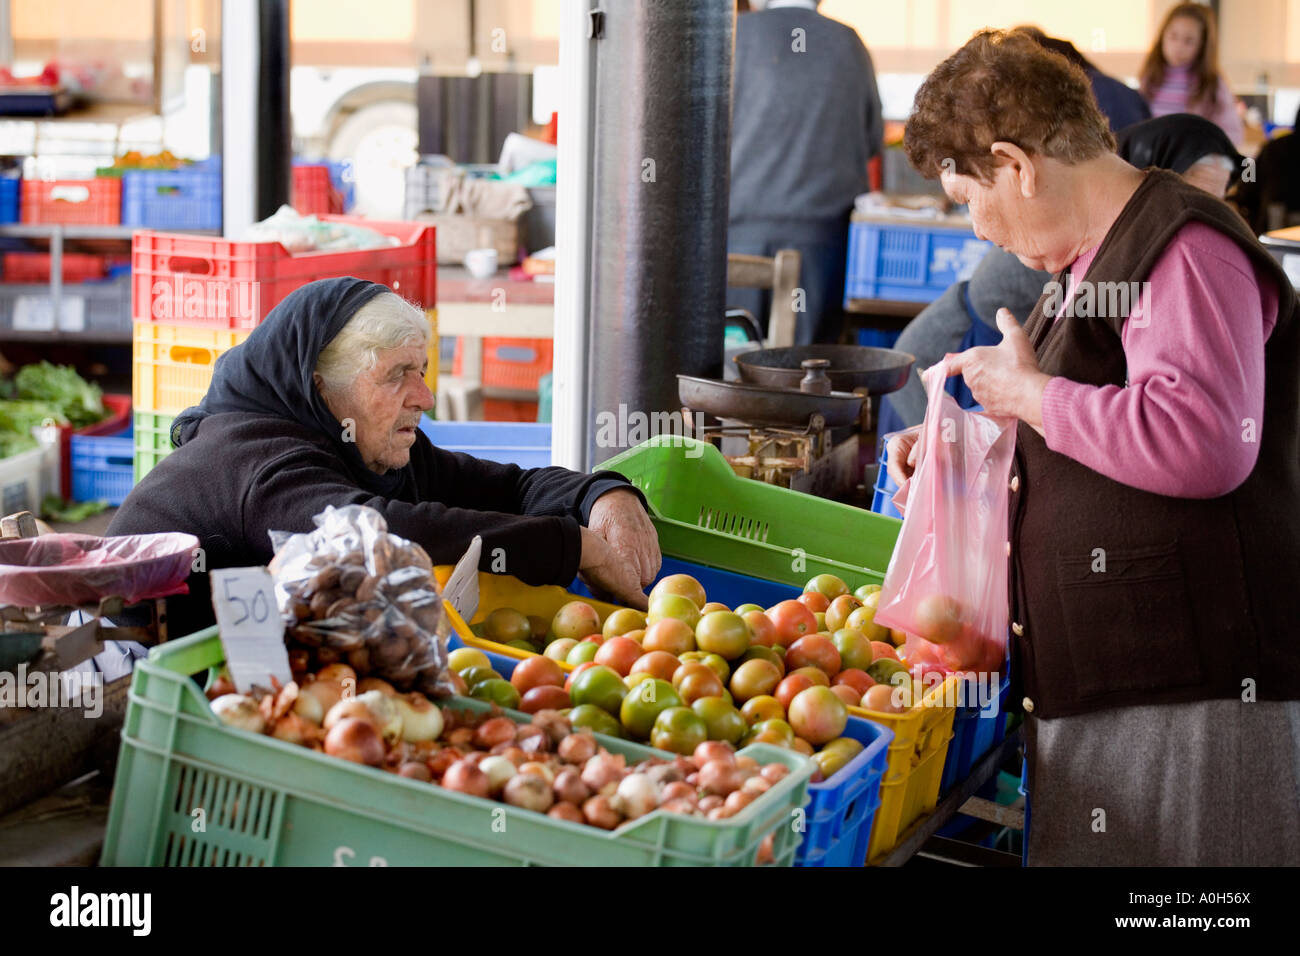 A LOCAL WOMAN IN TRADITIONAL BLACK, AT THE MARKET IN THE TOWN CENTRE OF OLD PAPHOS, CYPRUS WITH A CUSTOMER Stock Photo